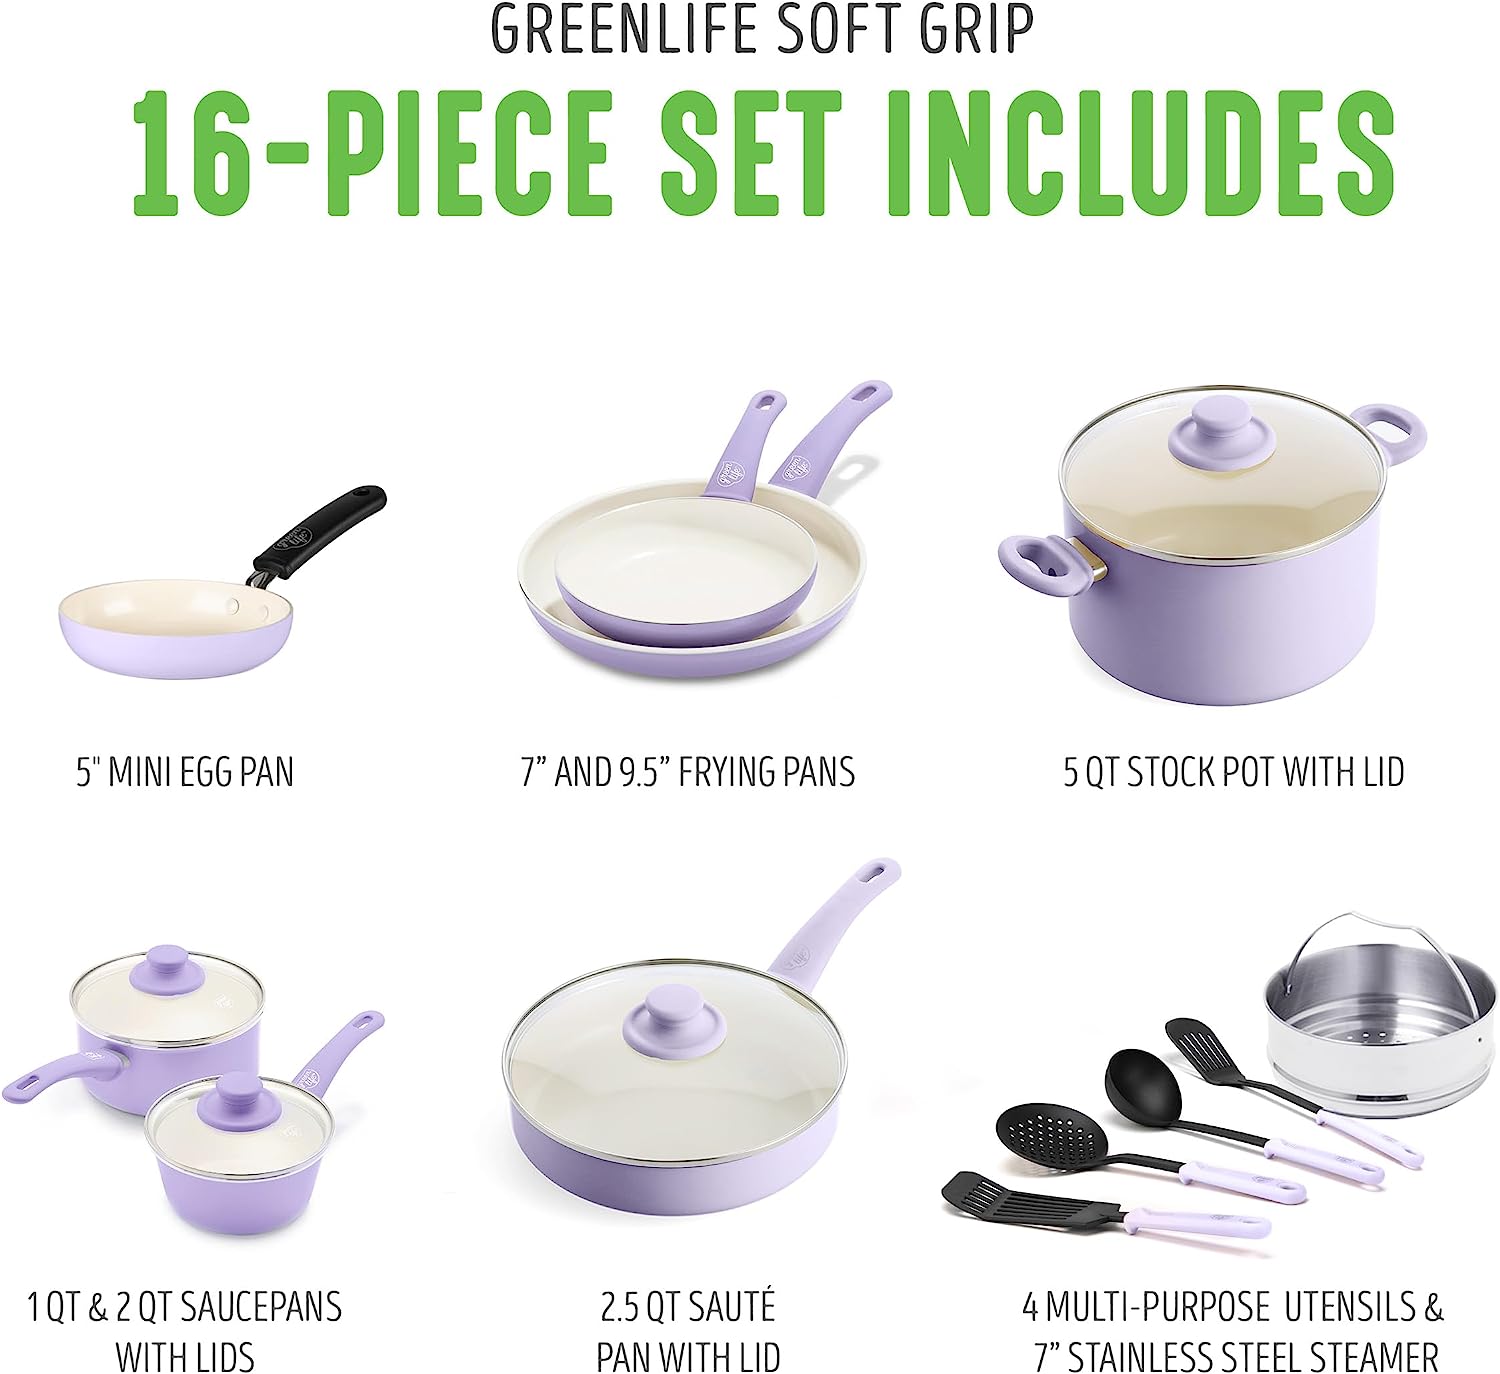 GreenLife Soft Grip Healthy Ceramic Nonstick 16 Piece Kitchen Cookware Pots and Frying Sauce Saute Pans Set, PFAS-Free with Kitchen Utensils and Lid, Dishwasher Safe, Lavender 16 Piece Cookware Set Lavender - image 3 of 8